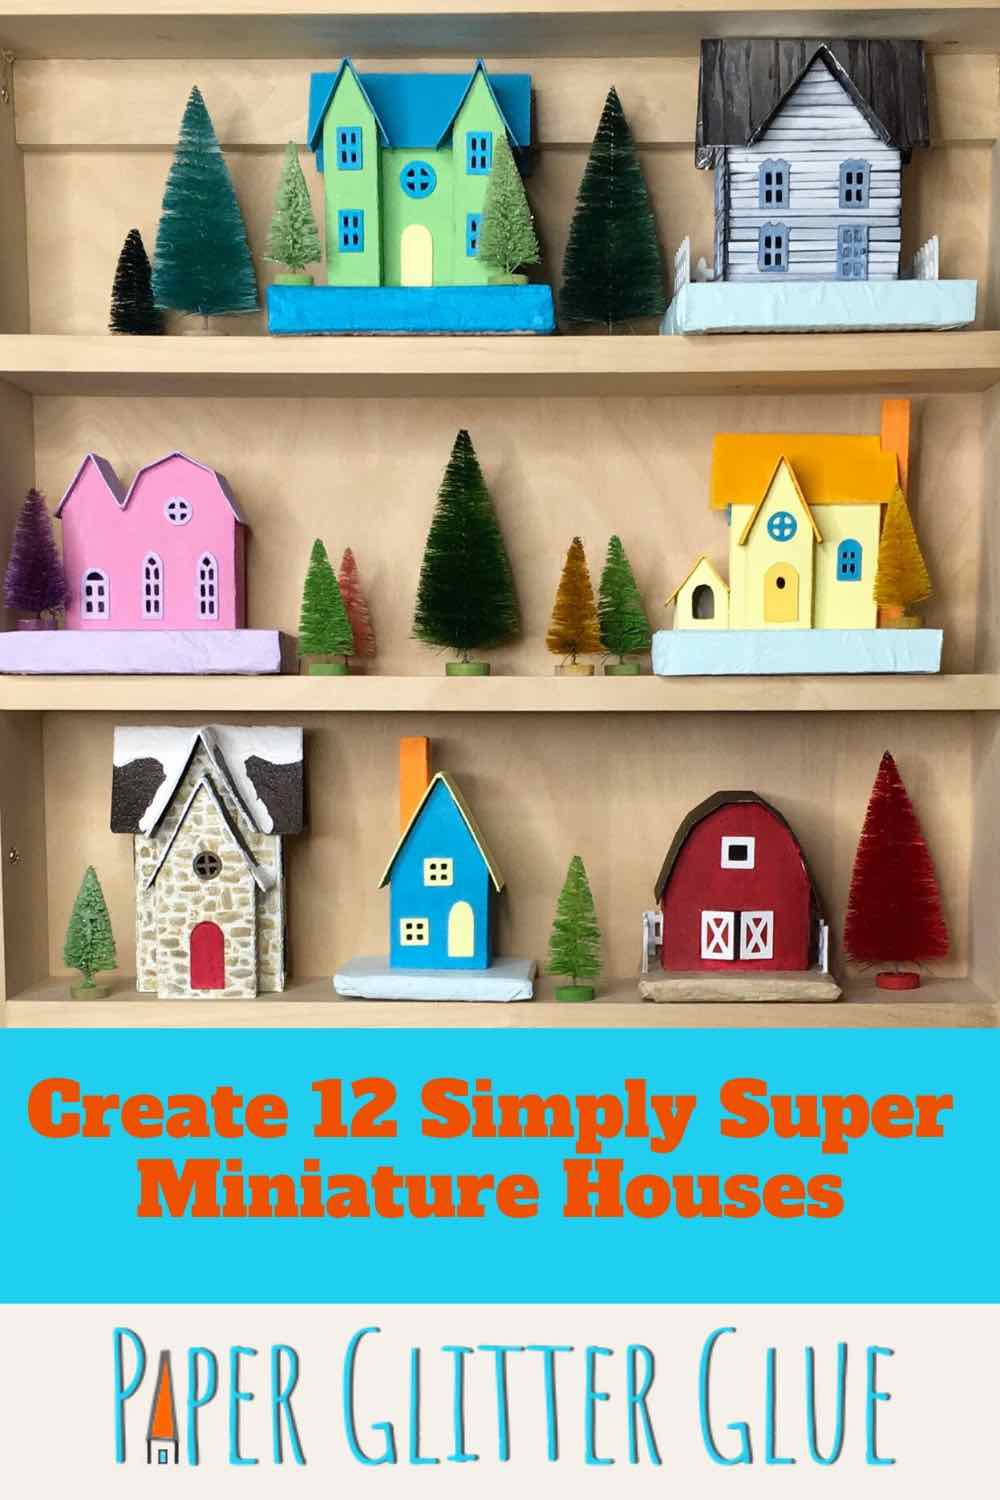 Book to make 12 Simply Super Miniatures Houses